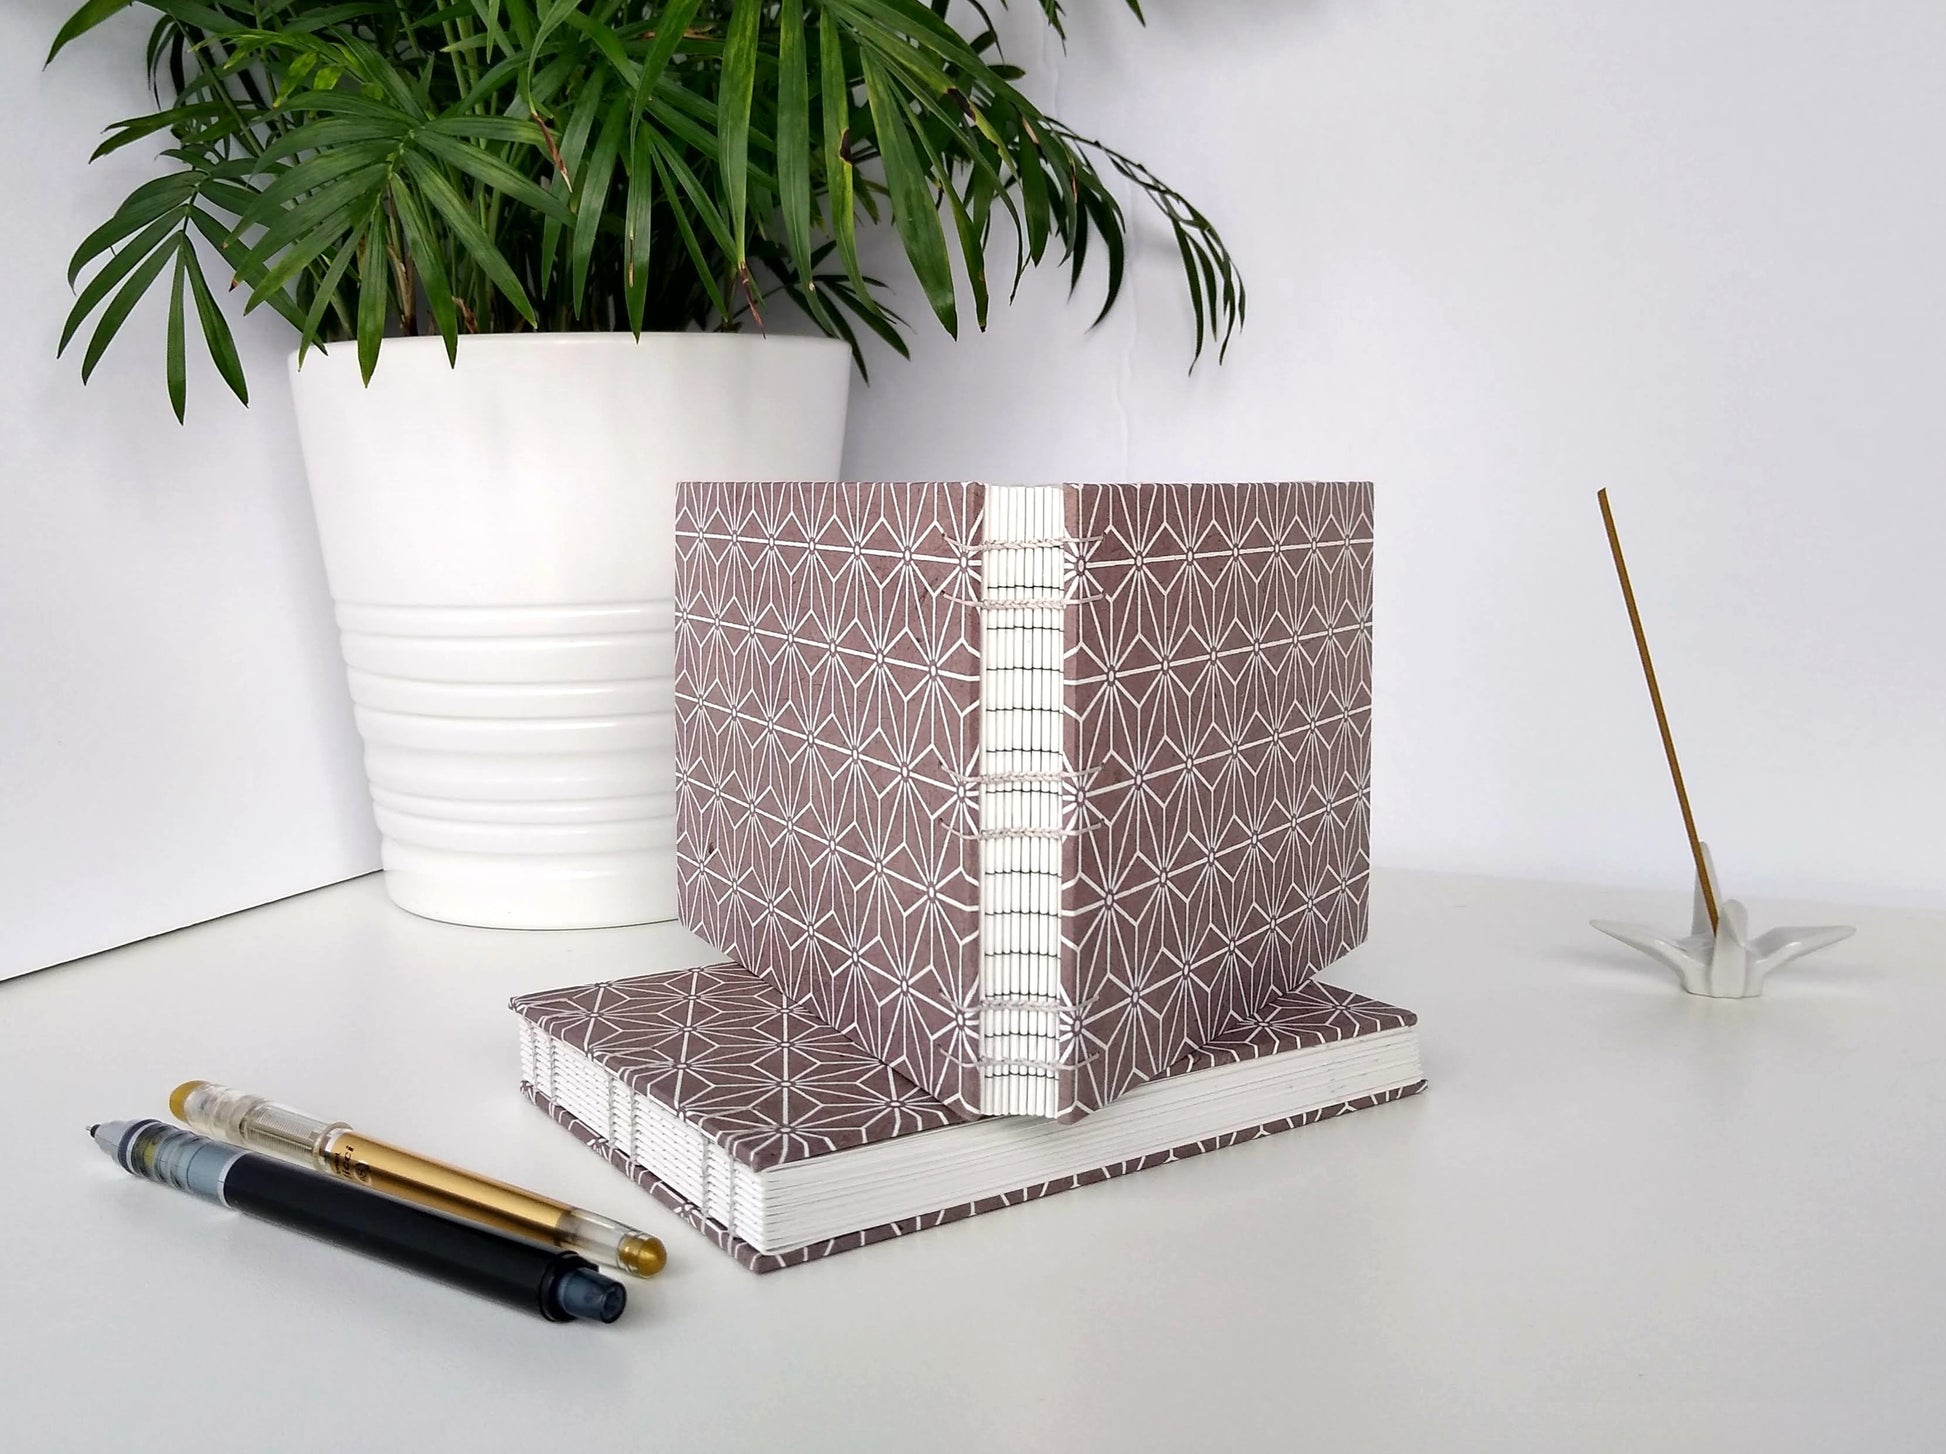 Two handmade journals are positioned beside a potted plant, a ceramic crane, a gold pen, and a black mechanical pencil. One is laying flat and the other is standing upright on top of it. The cover of the journals are grey with a white asanoha pattern repeated over its entirety. They are angled to show their open spines, stitched together with grey thread.